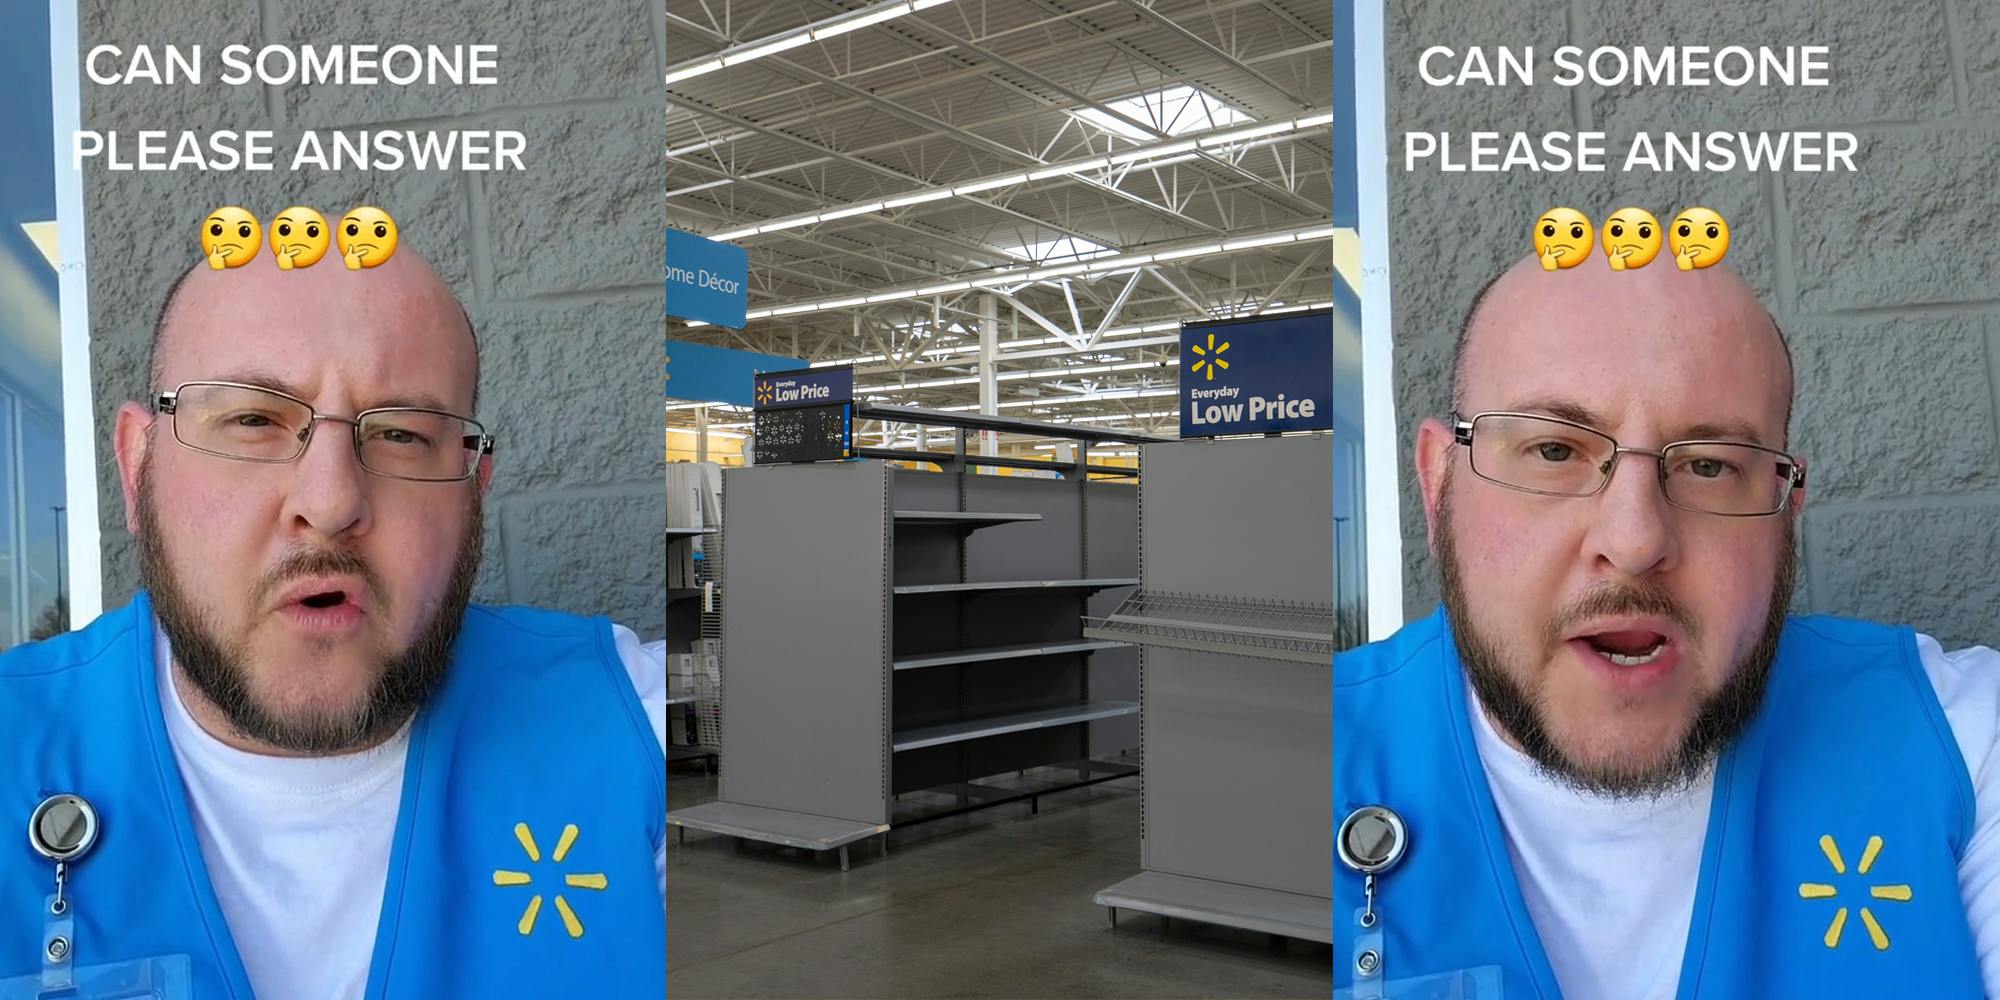 Walmart employee speaking with caption "CAN SOMEONE PLEASE ANSWER" (l) Walmart empty shelves (c) Walmart employee speaking with caption "CAN SOMEONE PLEASE ANSWER" (r)